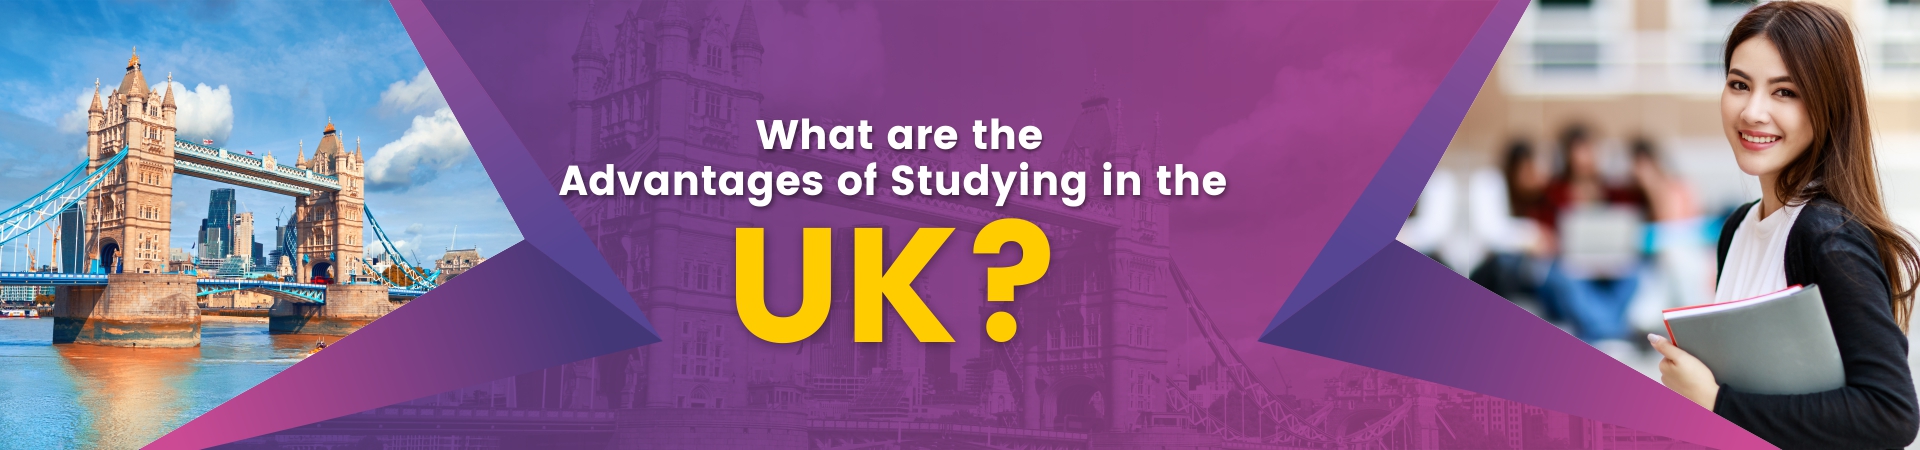 What are the Advantages of Studying in the UK?